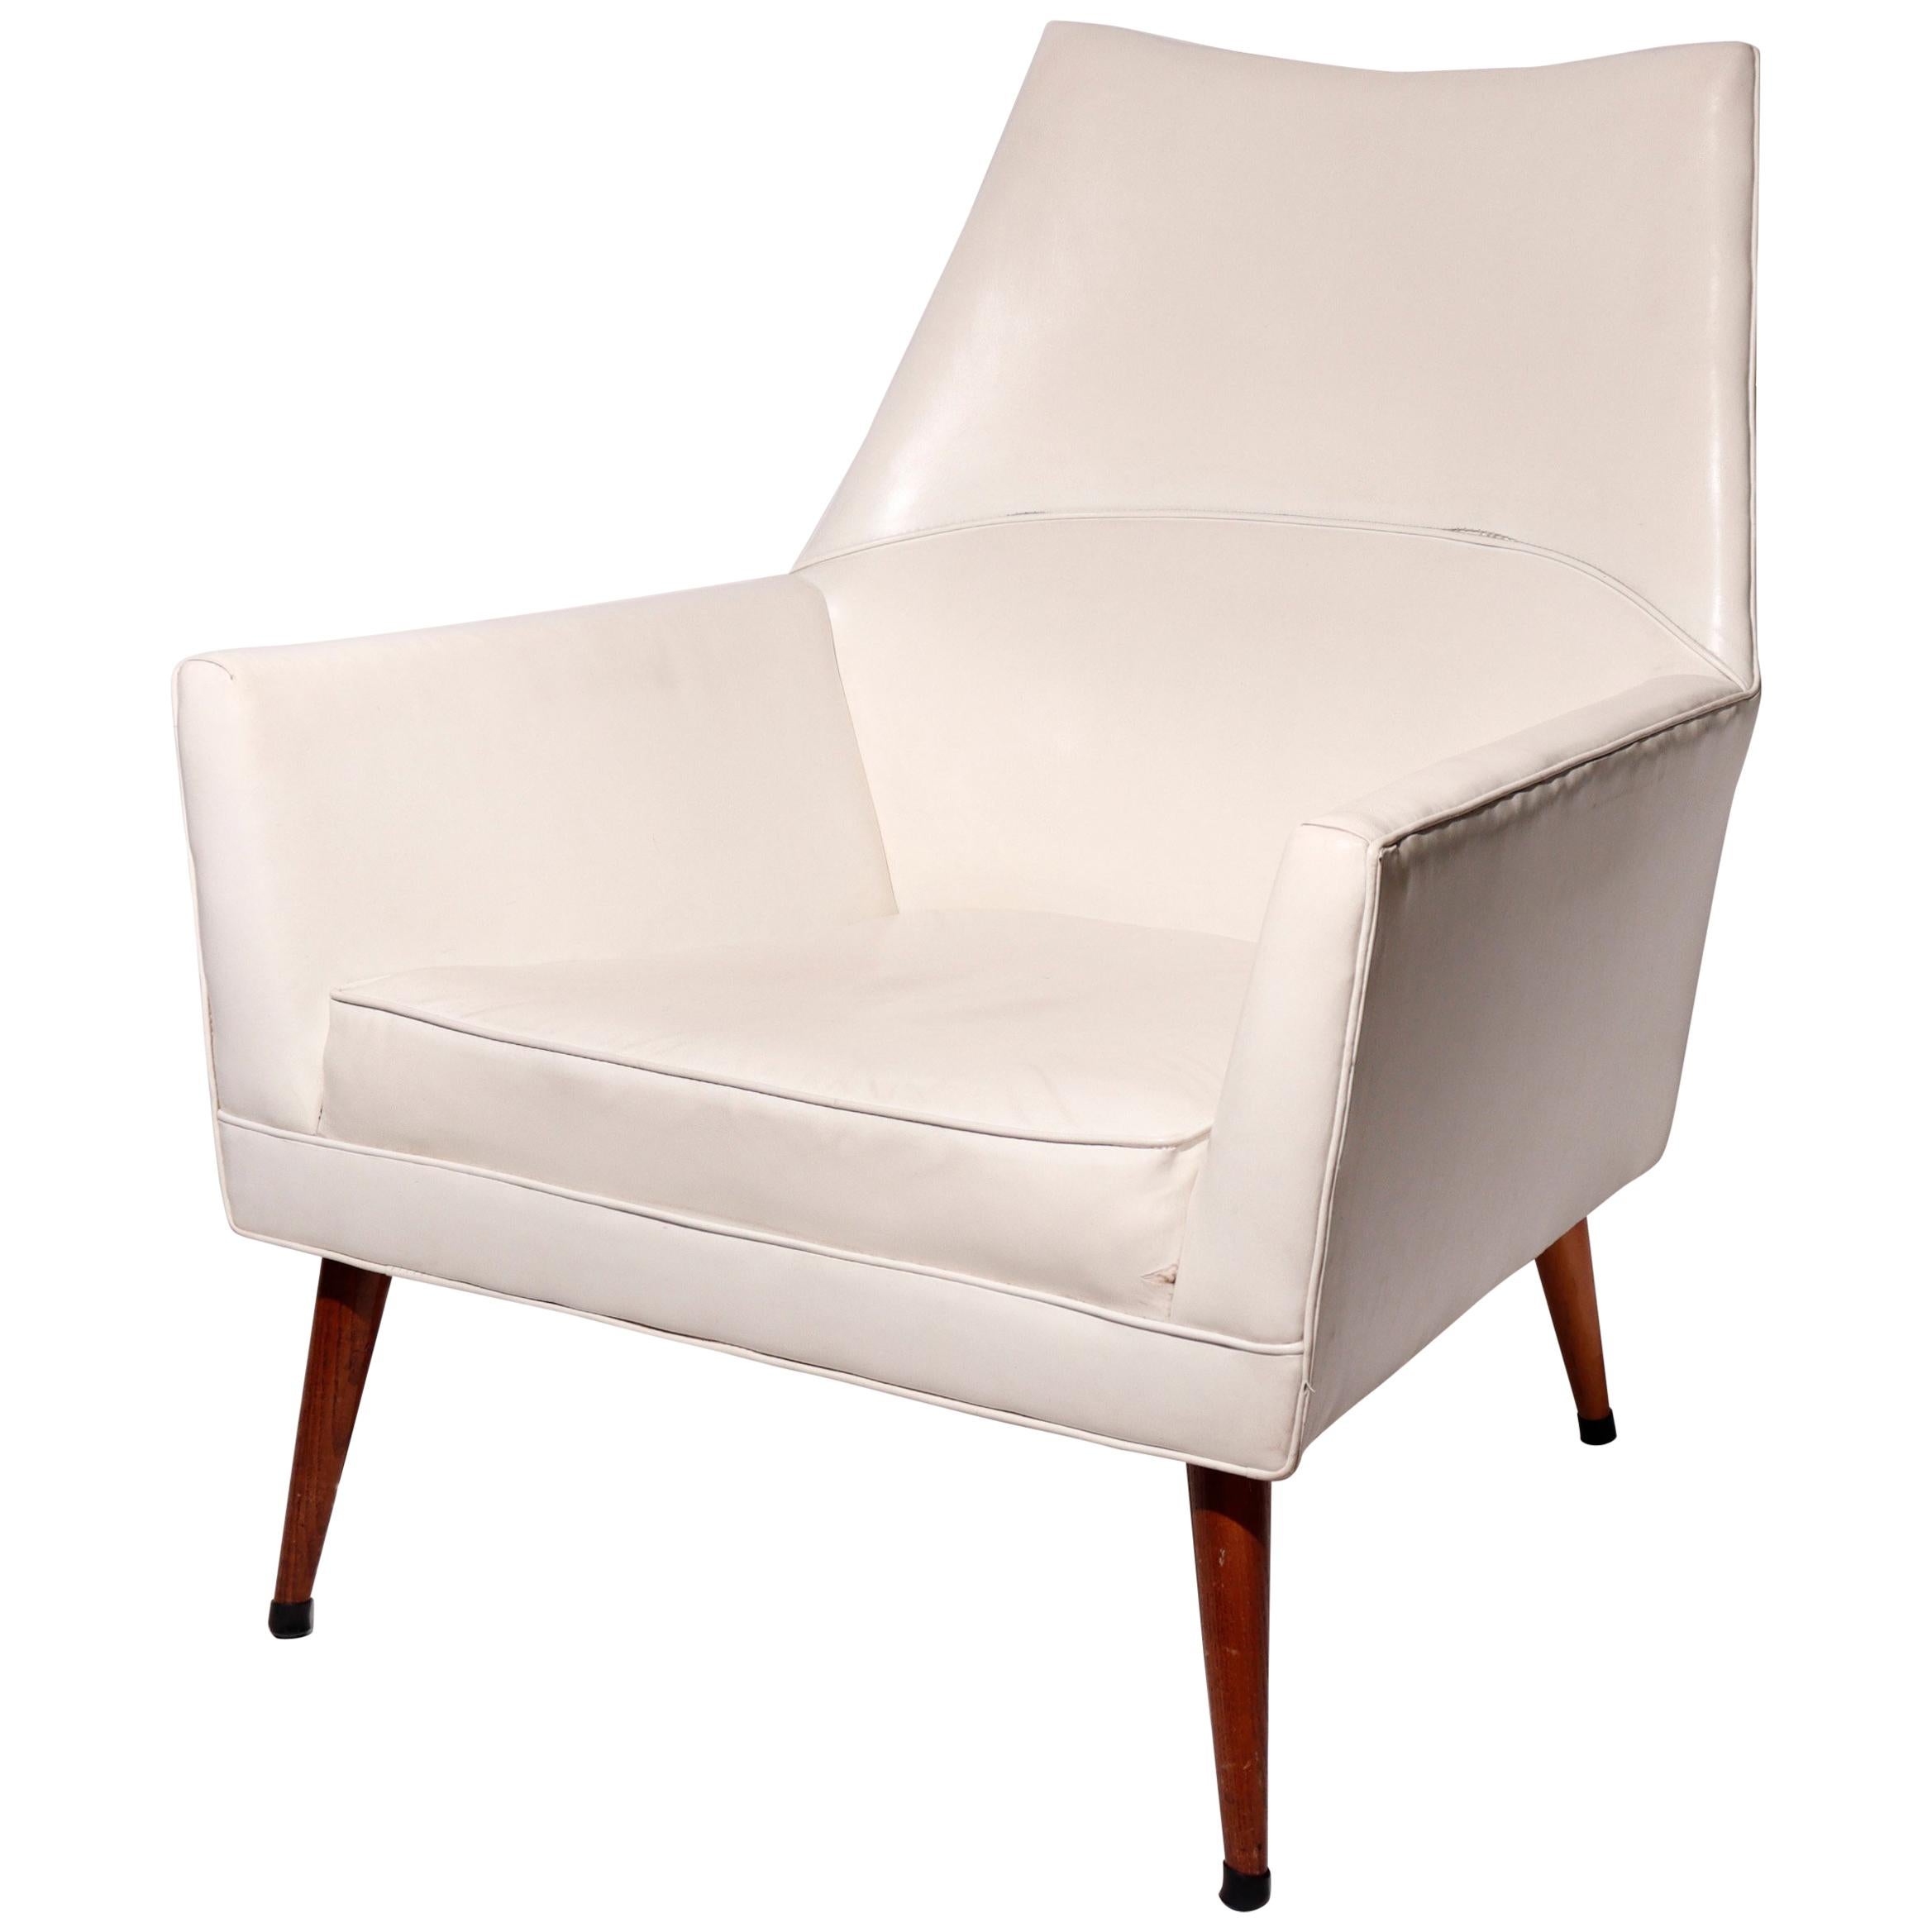 White Mid-Century Modern American 'Squirm' Lounge Chair by Paul McCobb For Sale